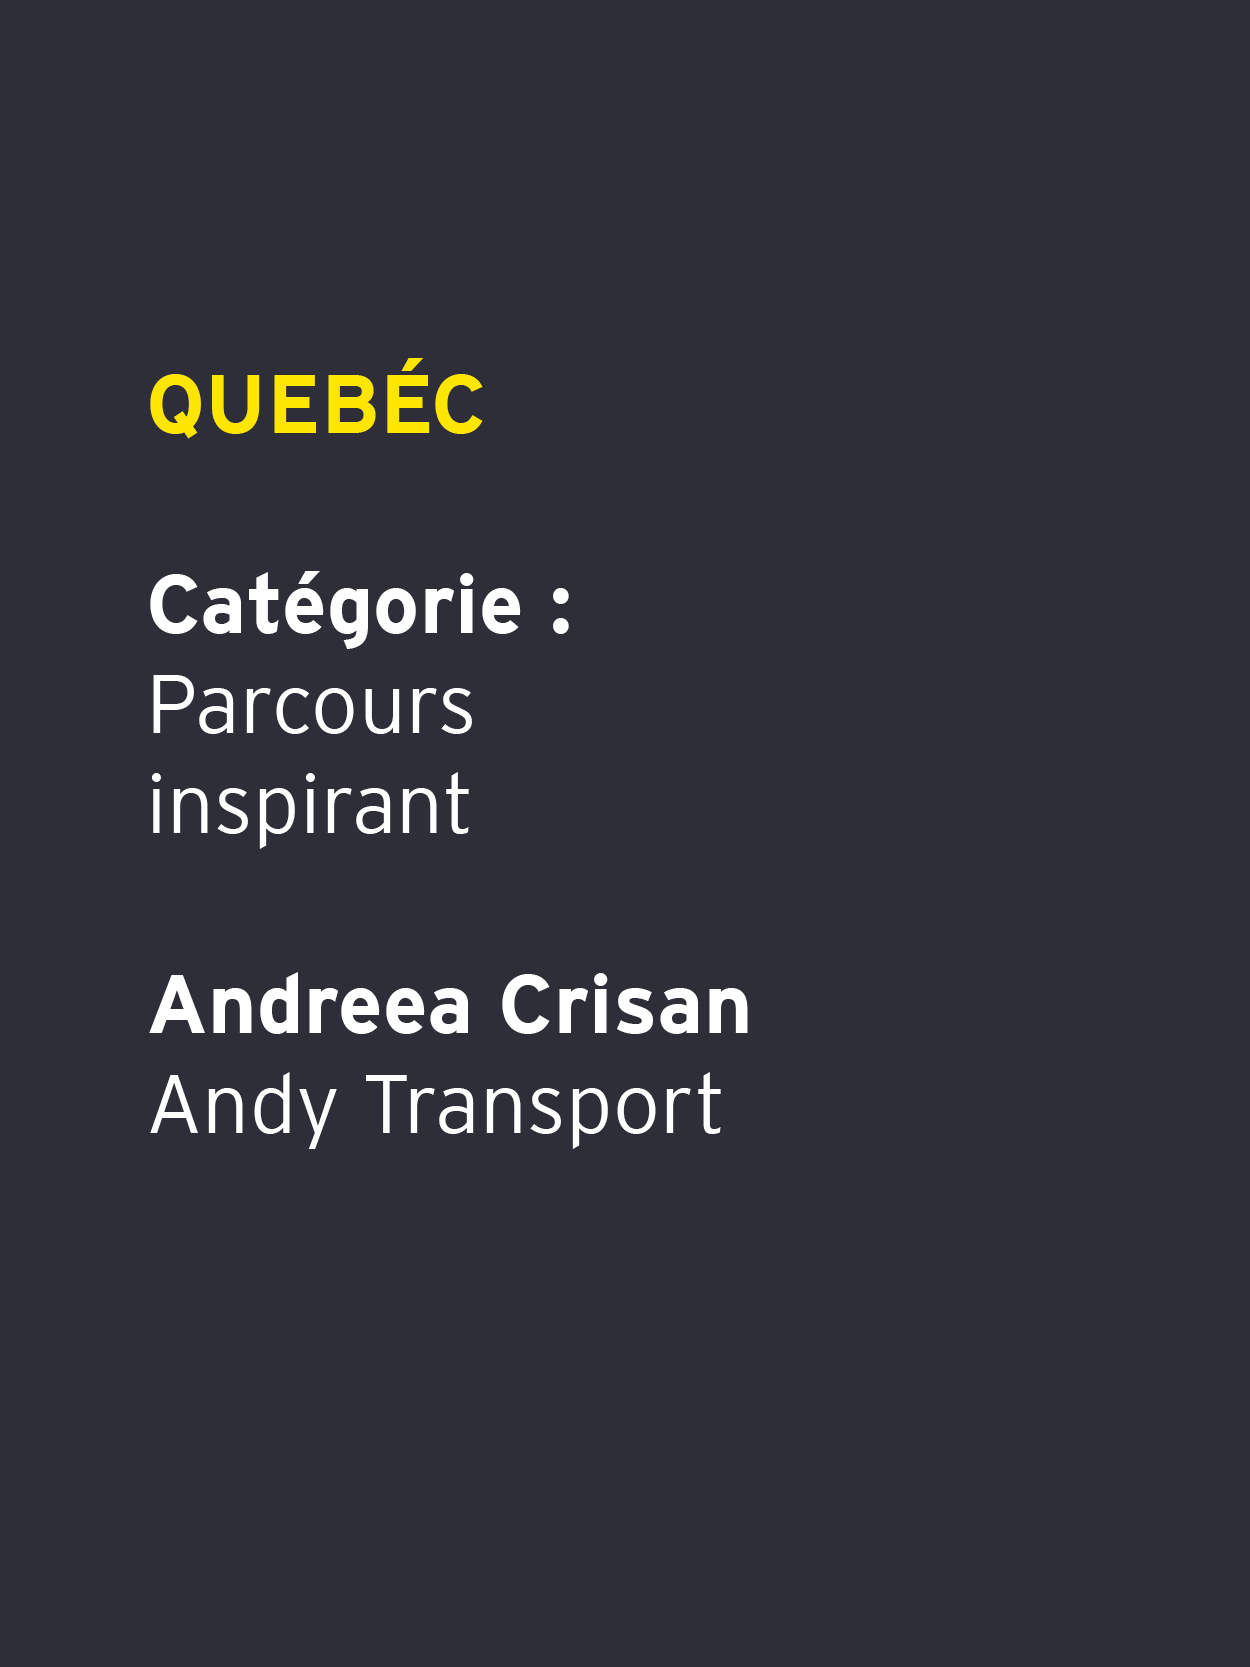             Andreea Crisan – Andy Transport         